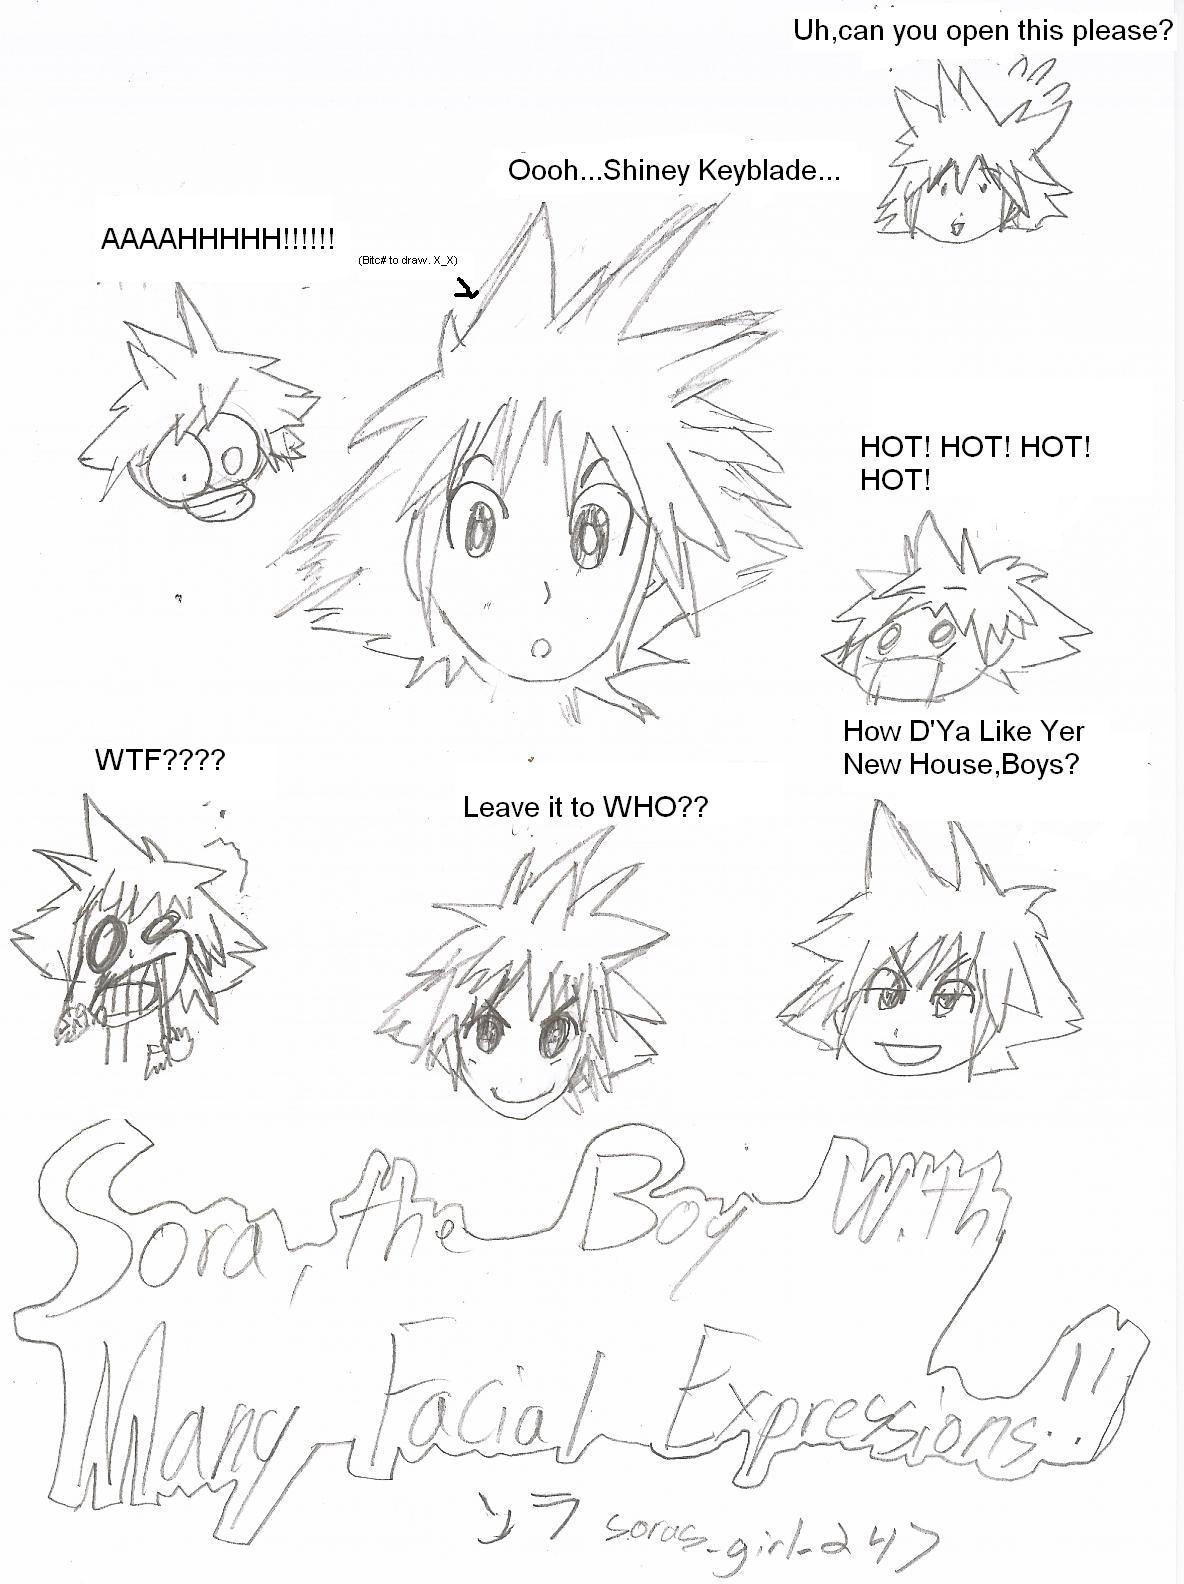 Sora,The Boy with Many Facial Expressions! by soras_girl_247